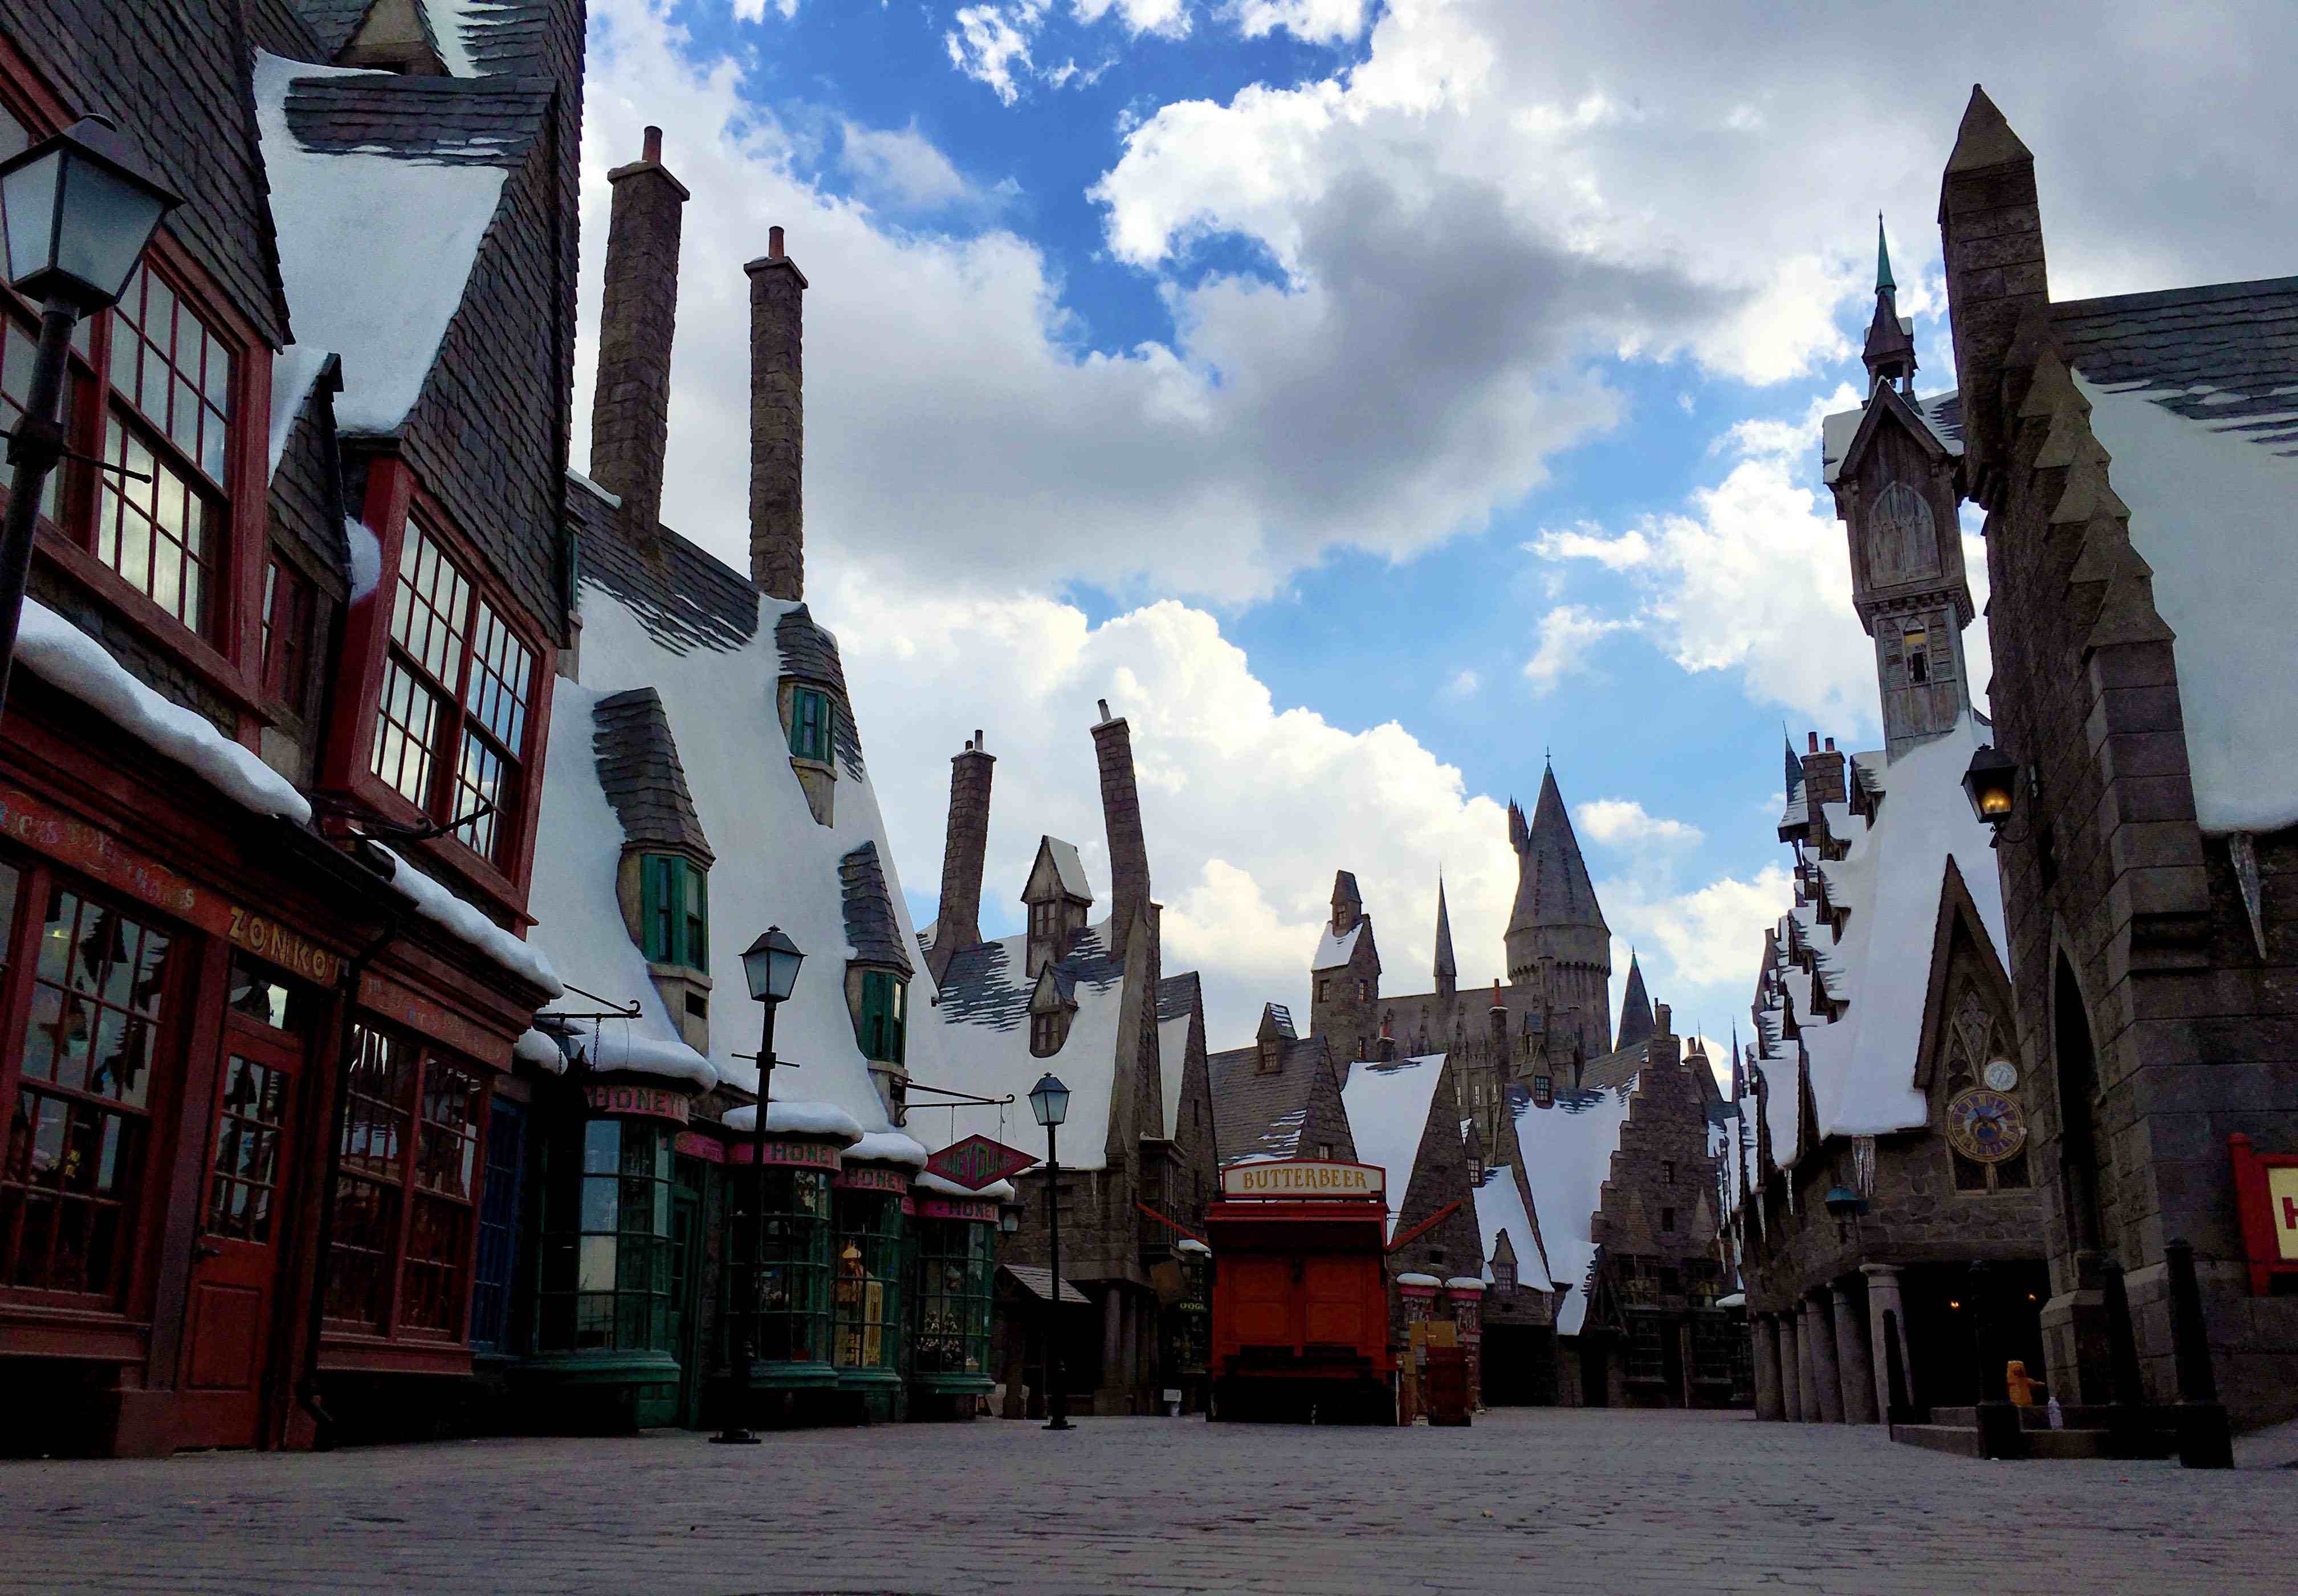 Hogsmeade village, and the Butterbeer cart